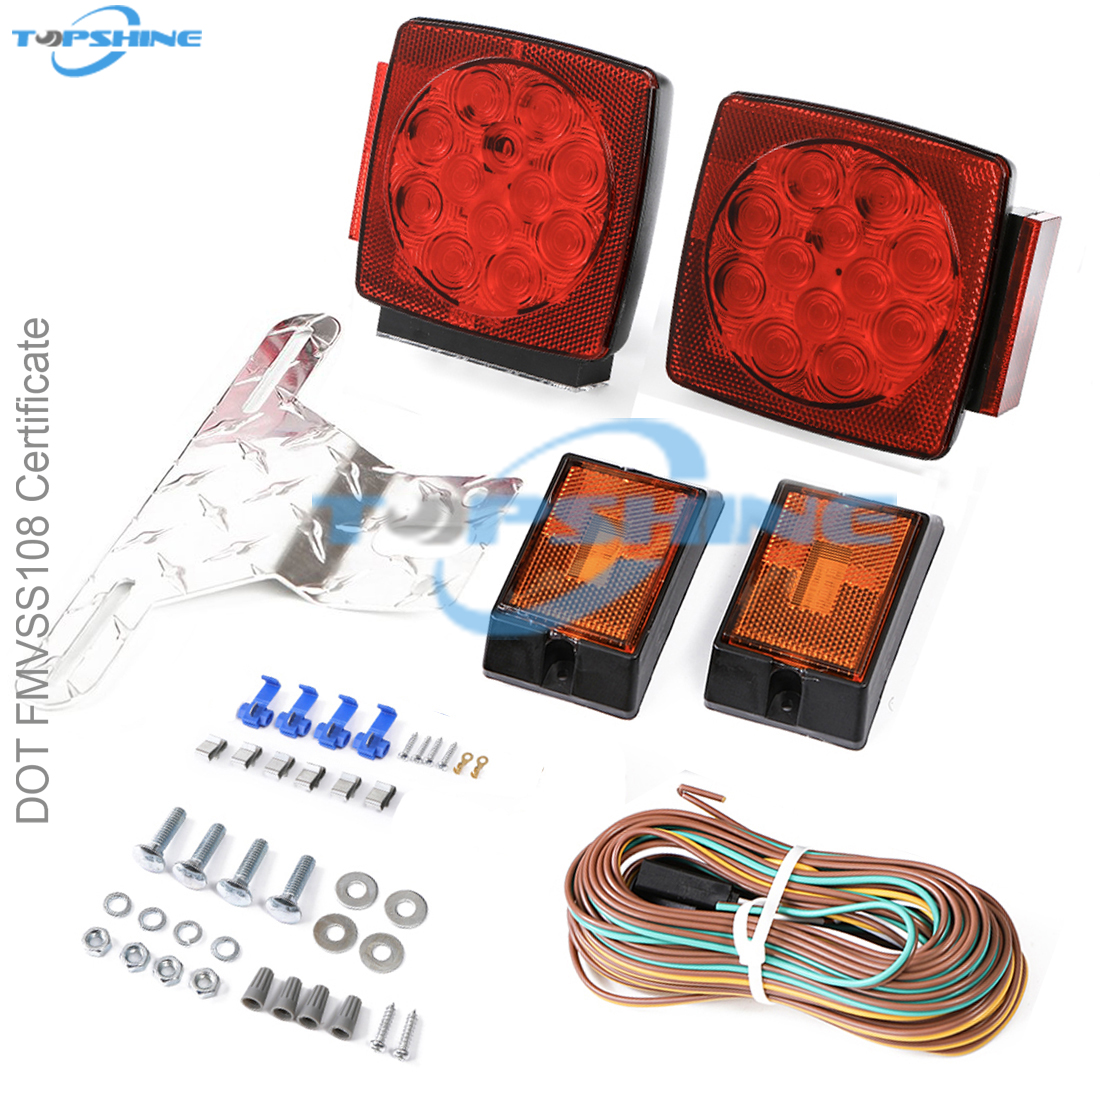 101001E 12V Submersible Trailer tail Light Kit Featured Image